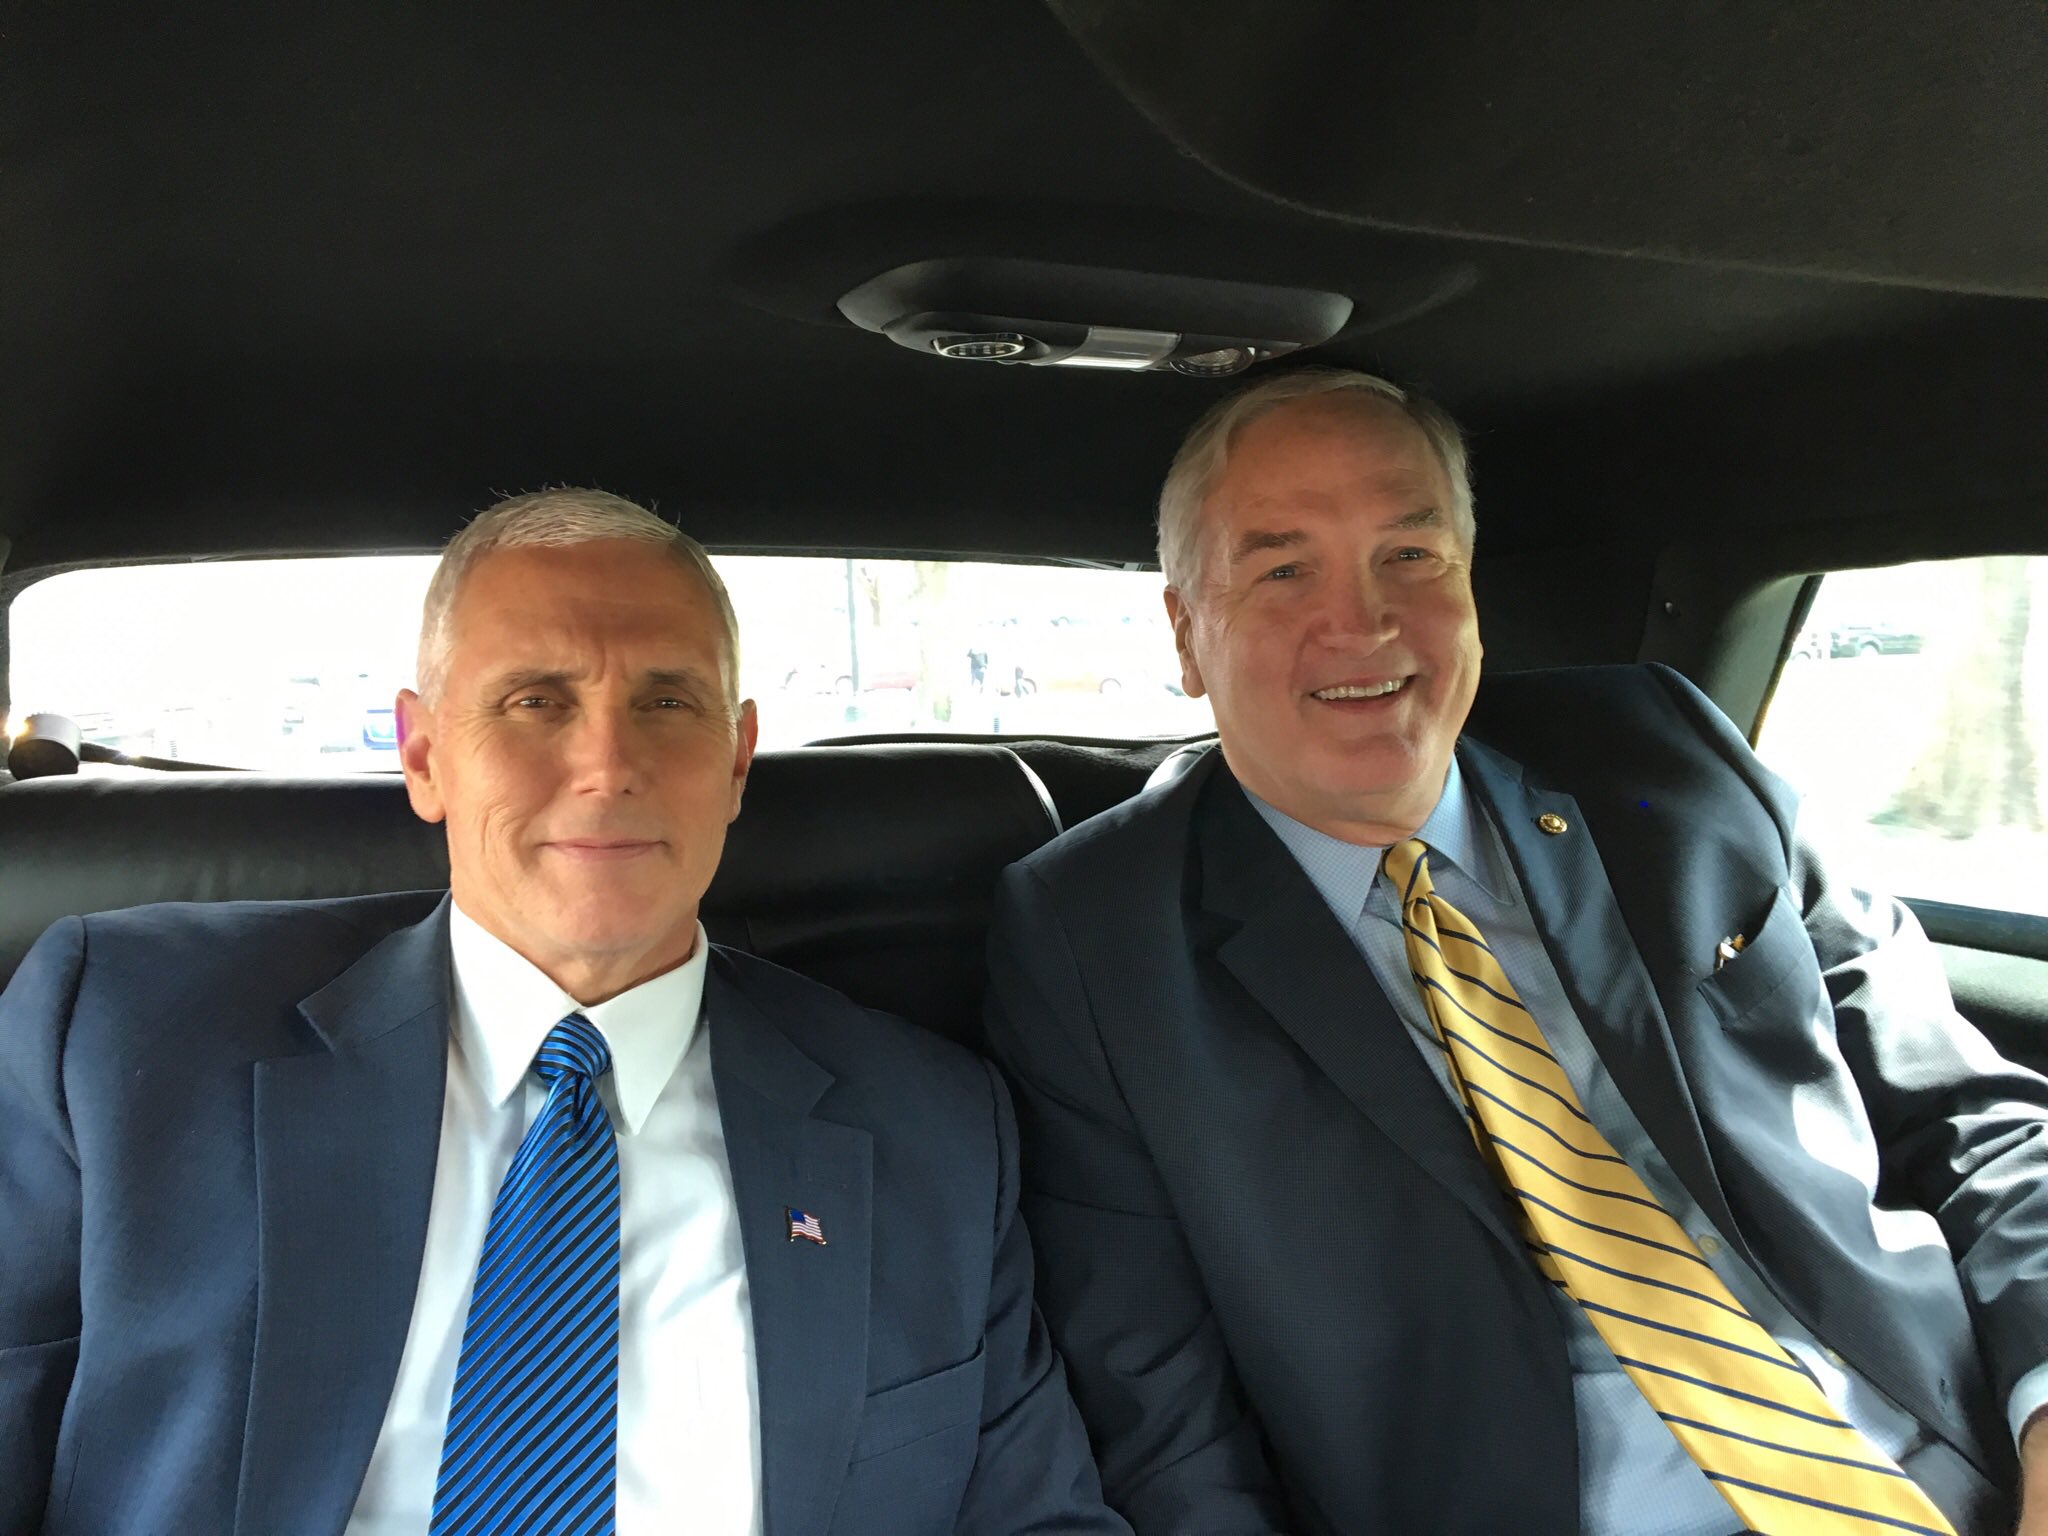 Happy Birthday to my friend Mike Pence!    